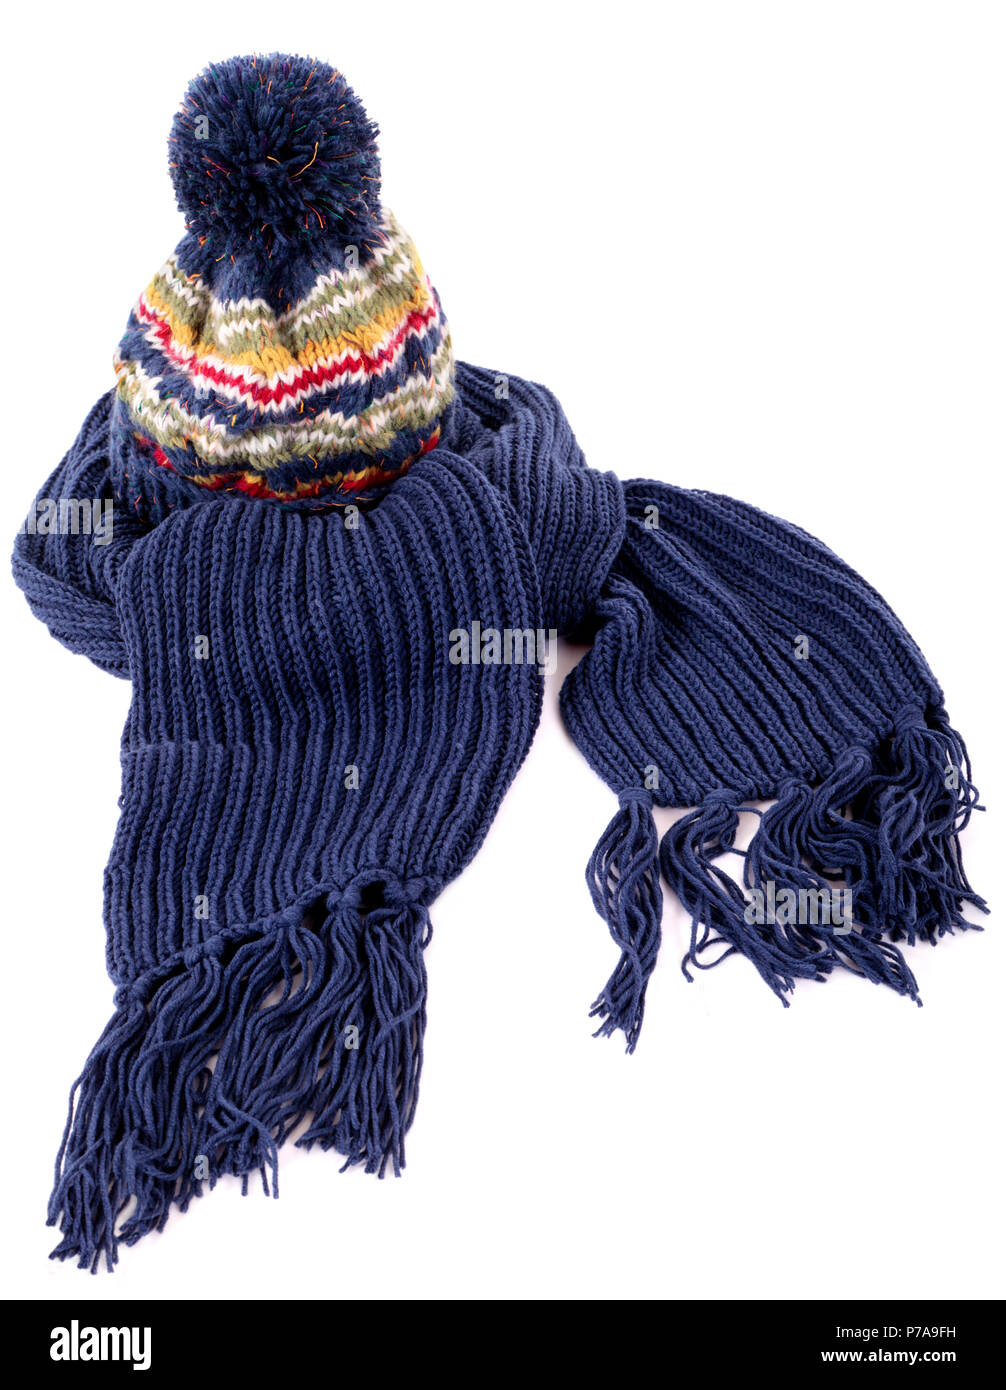 Blue winter bobble hat and matching scarf with tassels or fringe isolated against a white background Stock Photo